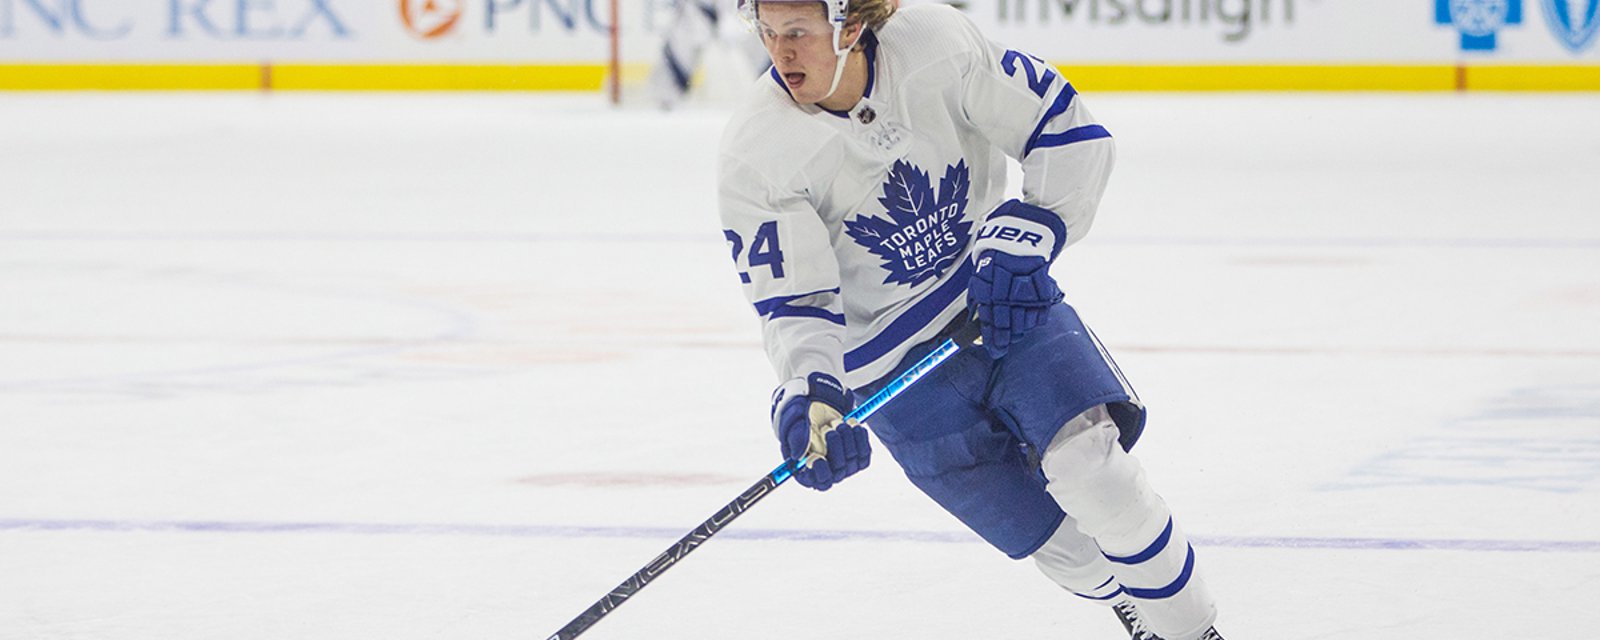 Breaking: Leafs pull Kapanen from lineup minutes before puck drop